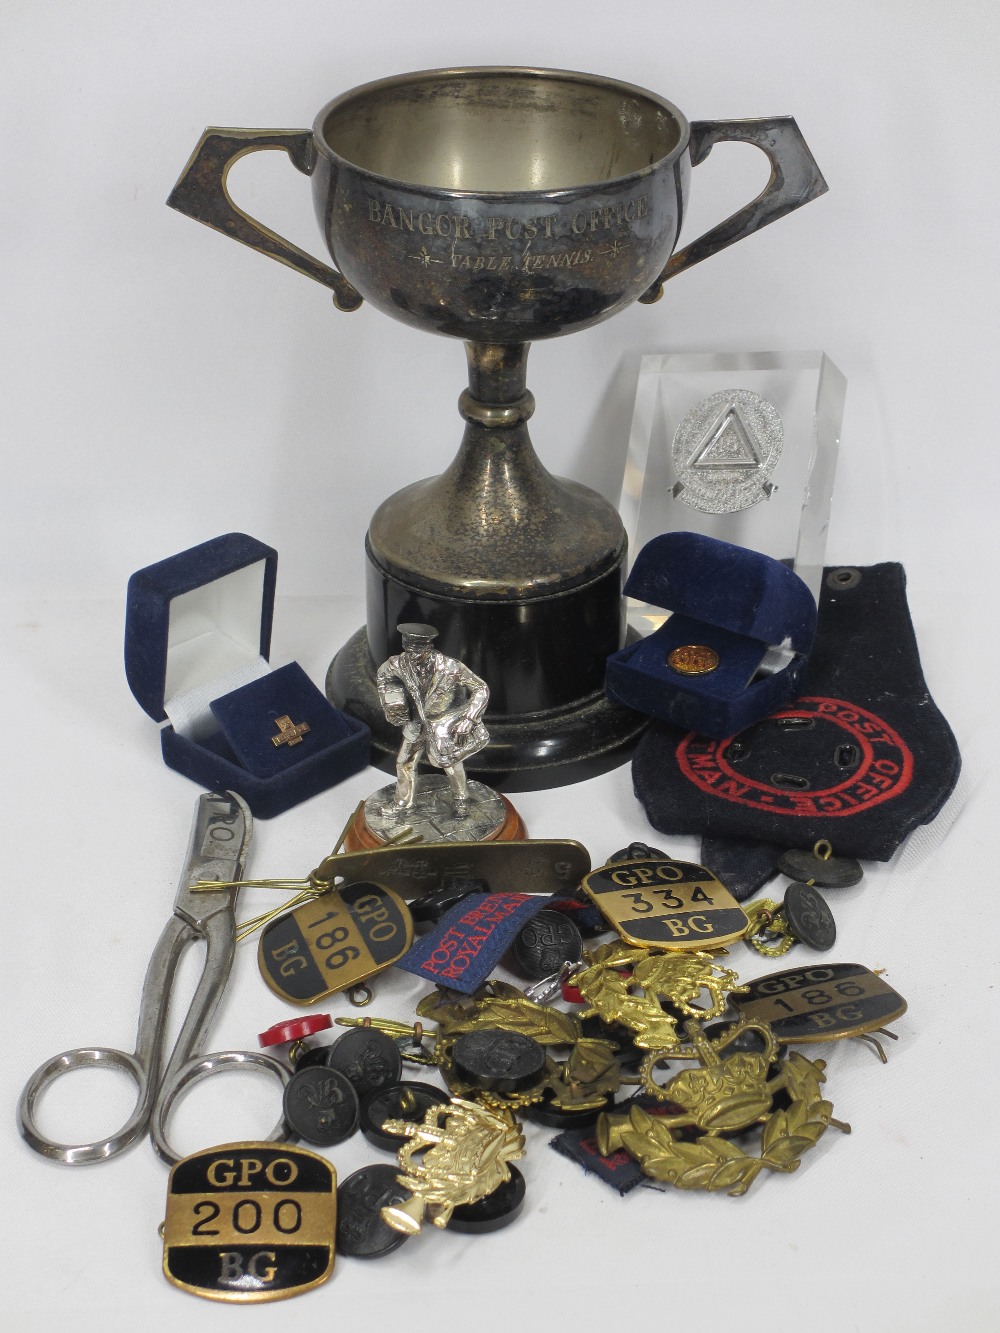 ROYAL MAIL/POST OFFICE COLLECTABLE GOODS to include badges and buttons, etched drinking glassware, - Image 3 of 5